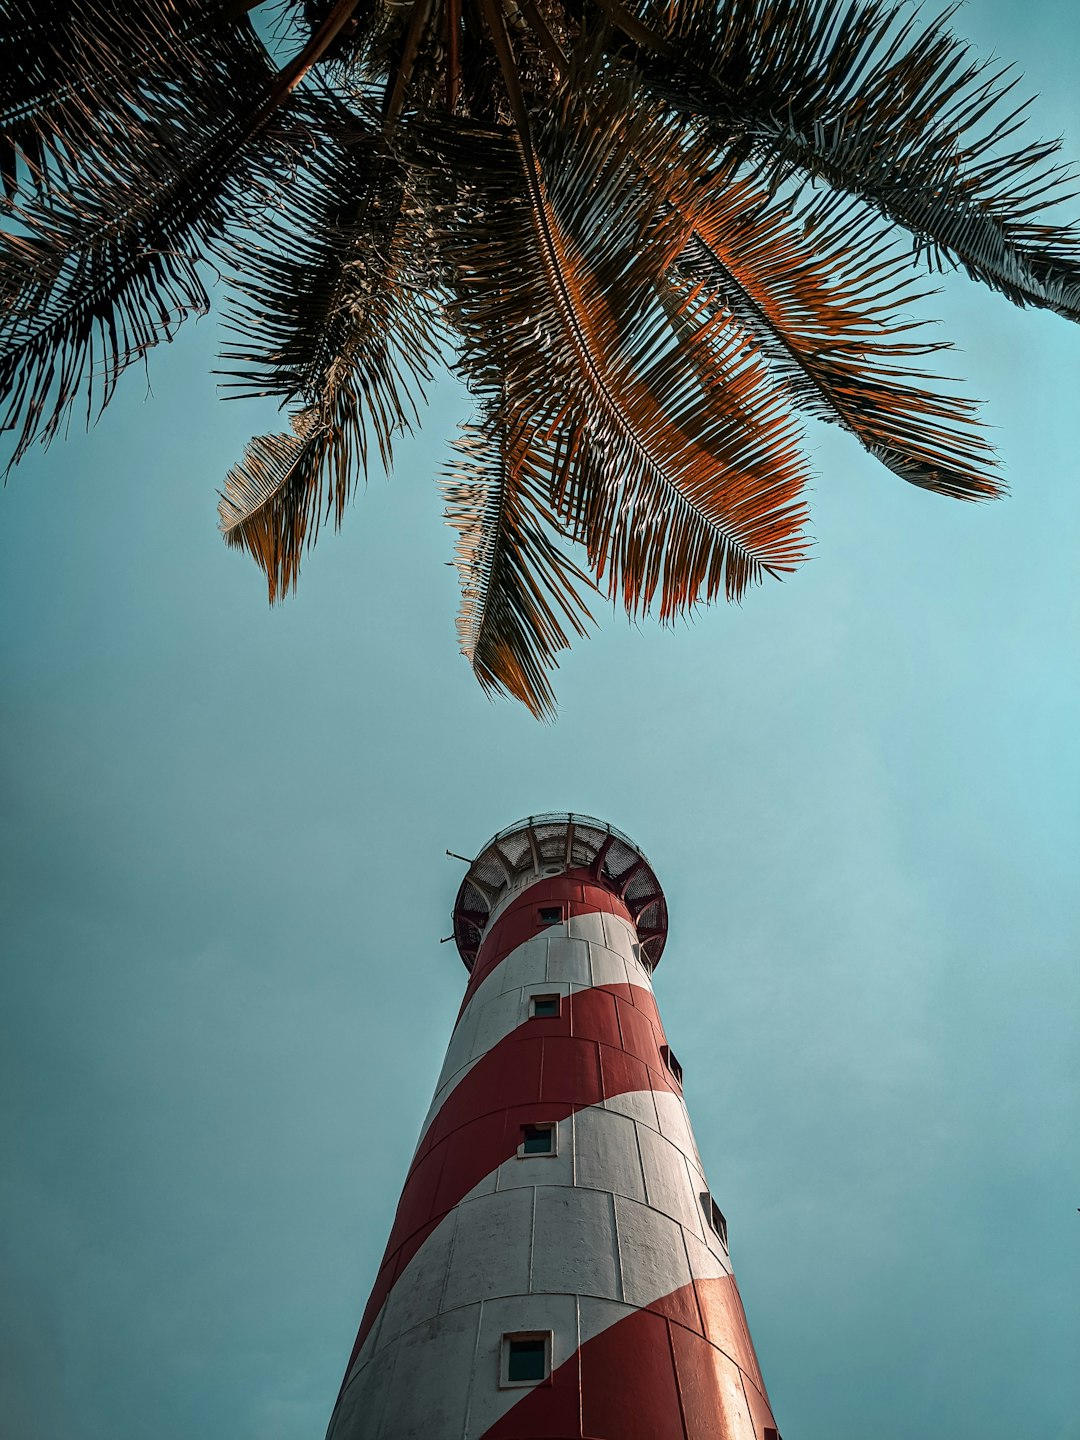 travelers stories about Lighthouse in Andaman and Nicobar Islands, India